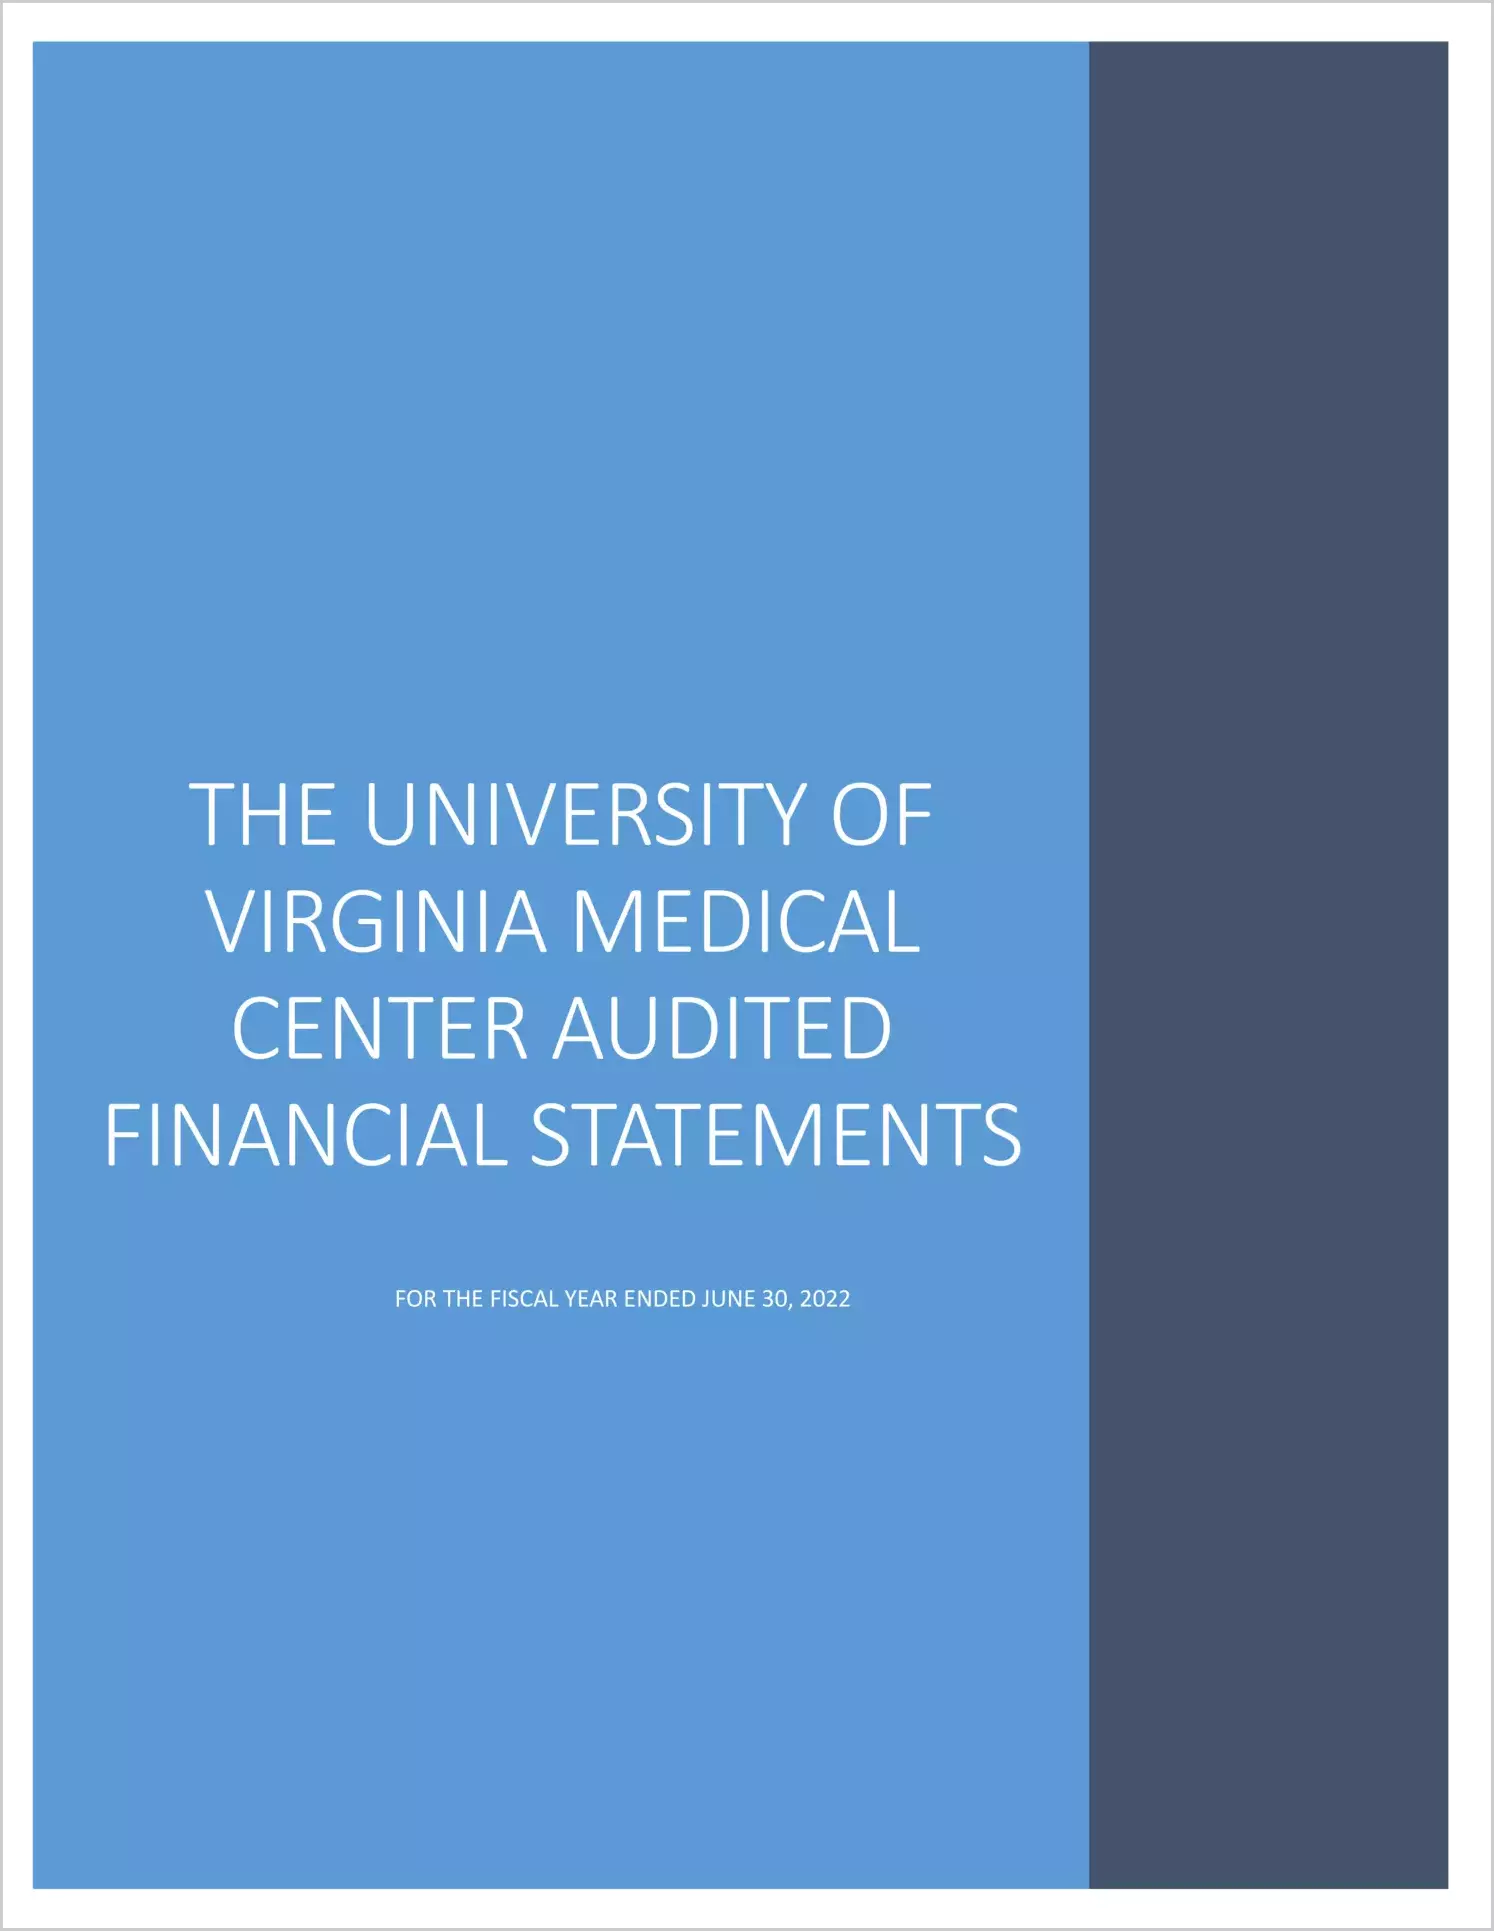 University of Virginia Medical Center Financial Statements for the year ended June 30, 2022